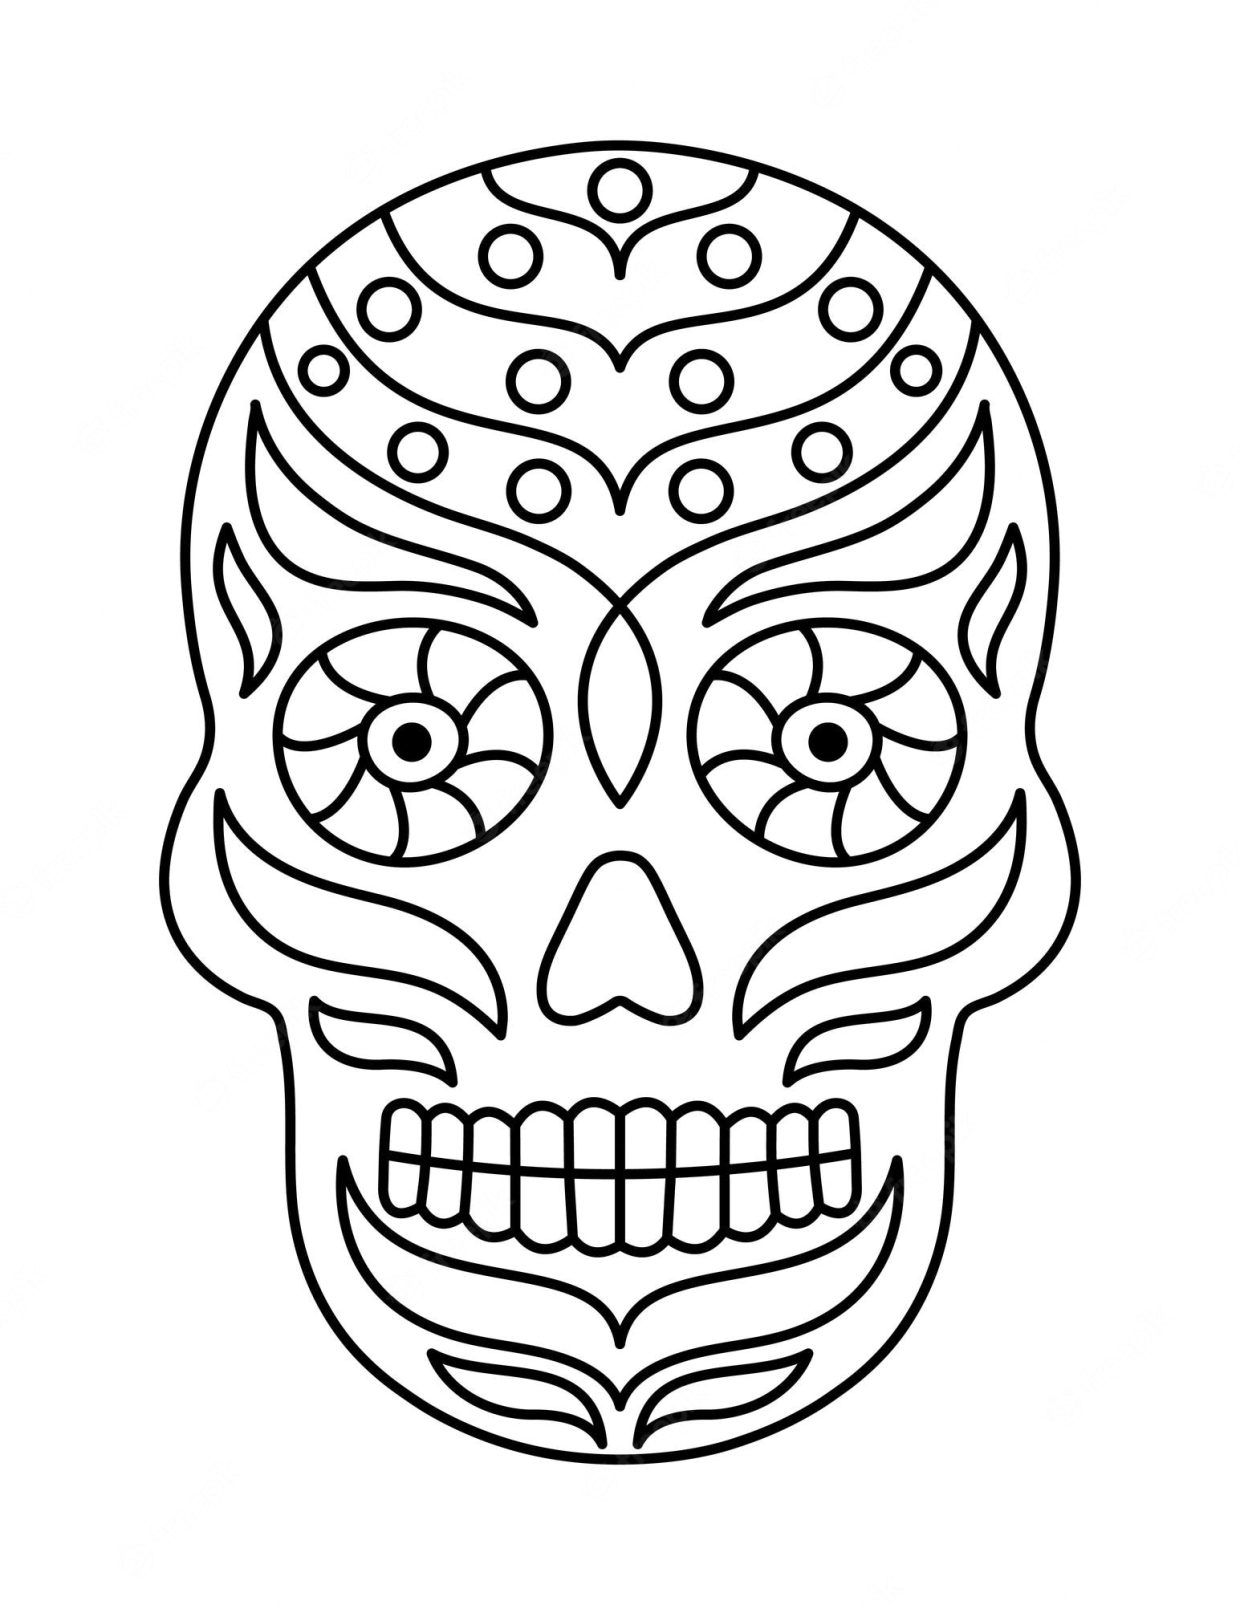 Skull Coloring Pages: Unleash Your Creativity With Unique Designs